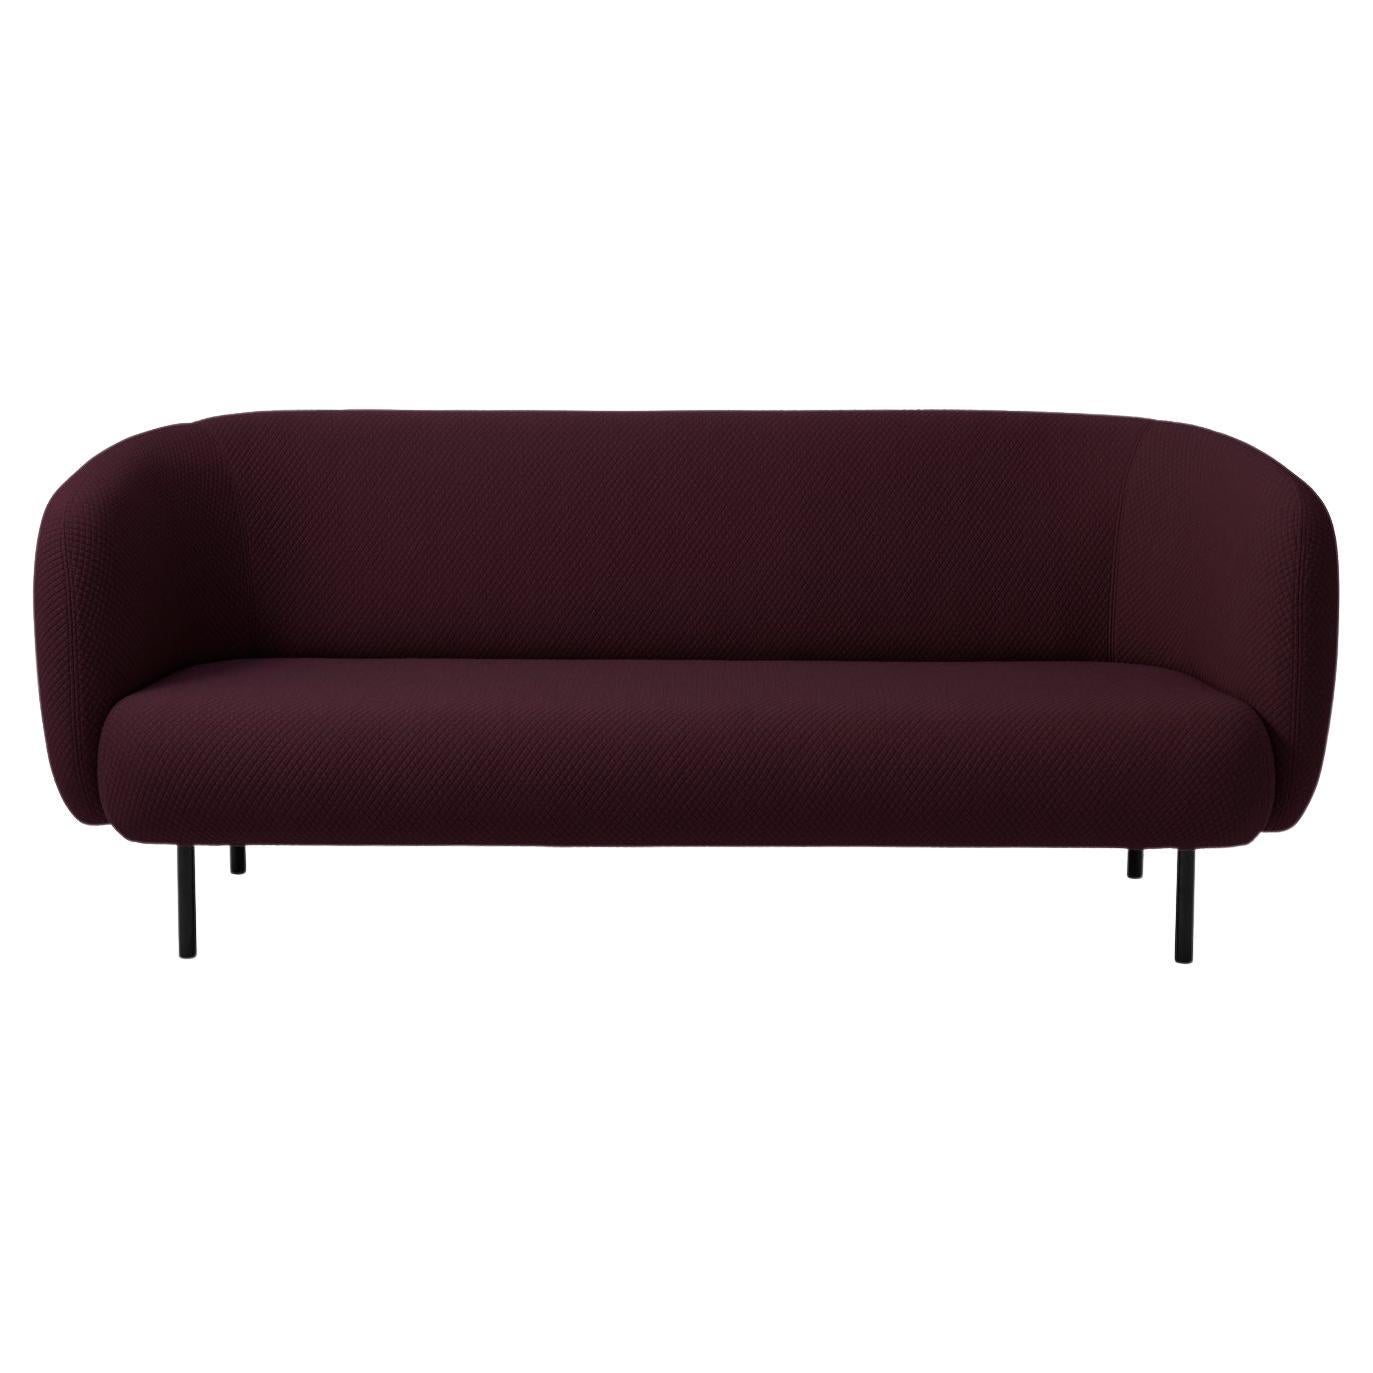 Caper 3 Seater Mosaic Dark Bordeaux by Warm Nordic